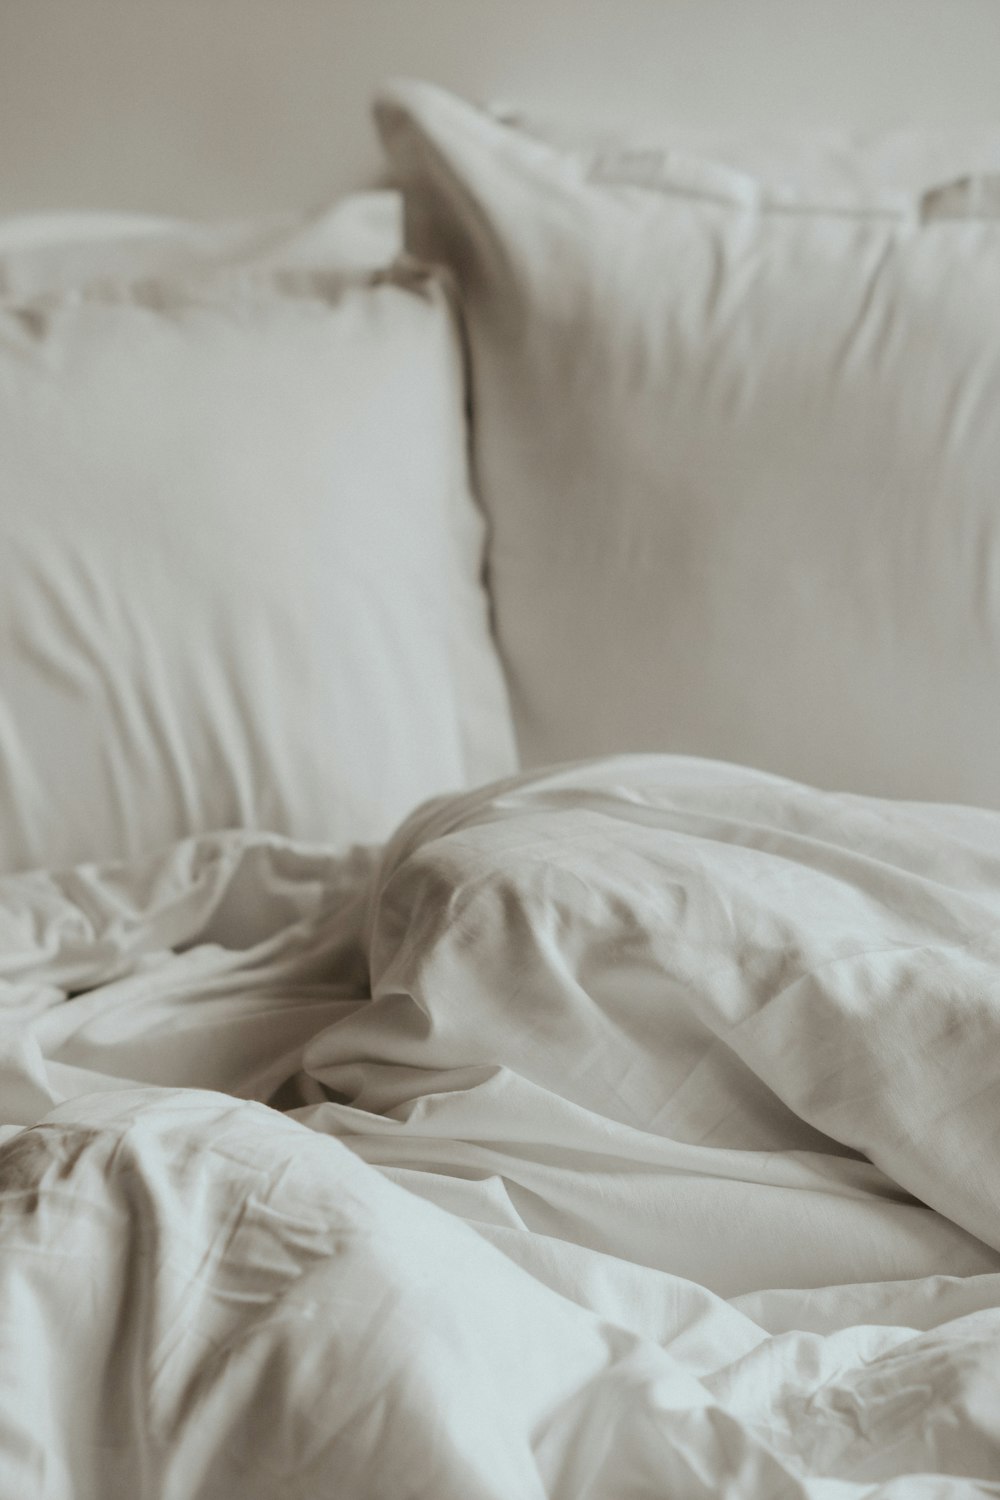 White Pillow Pictures  Download Free Images on Unsplash